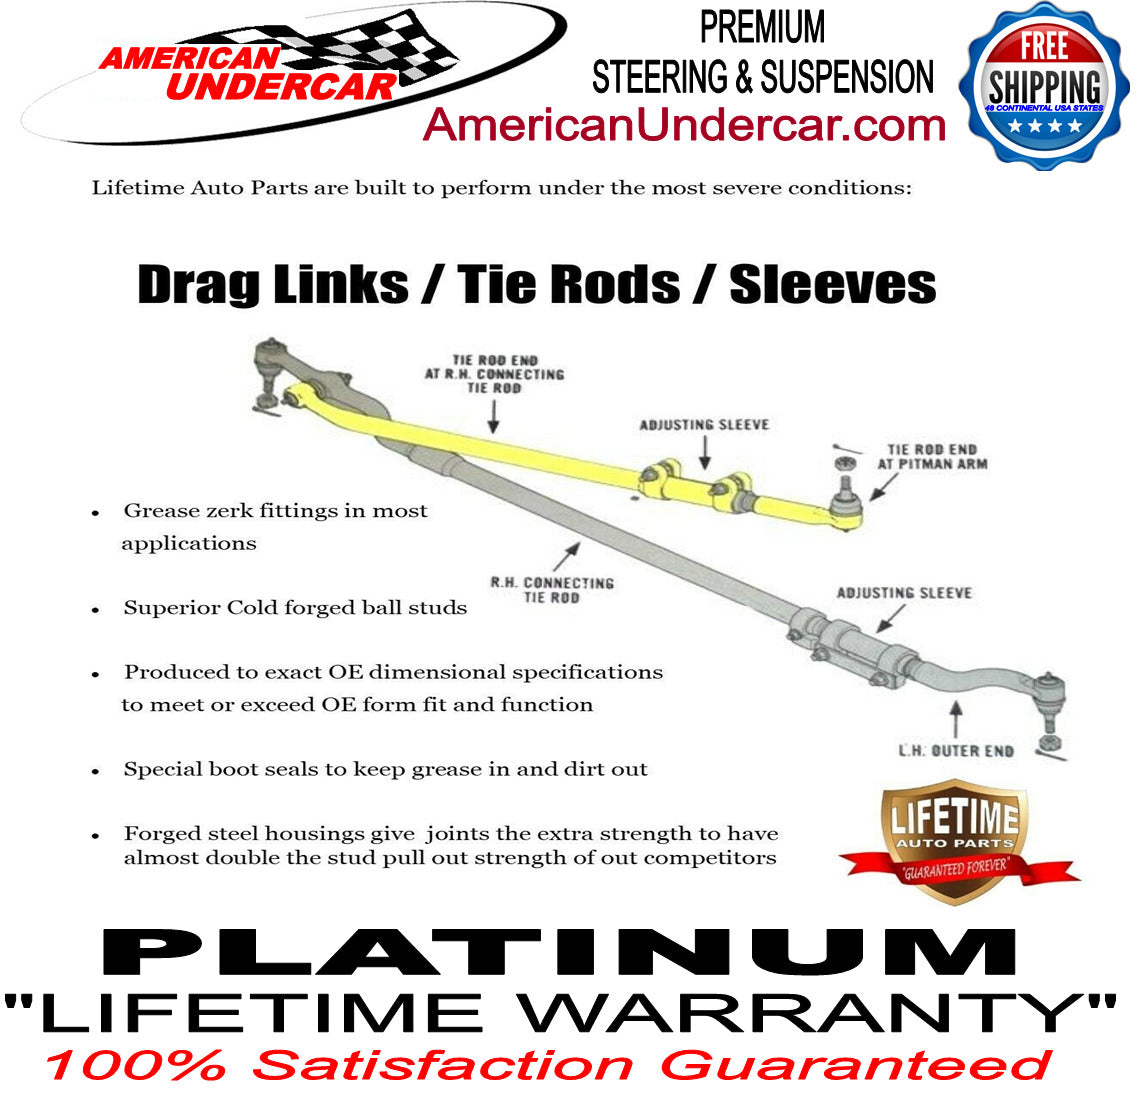 Lifetime Auto Parts Tie Rod & Sleeve Kit for 2017-2019 Ford F250, F350 Super Duty 4x4 Wide Frame